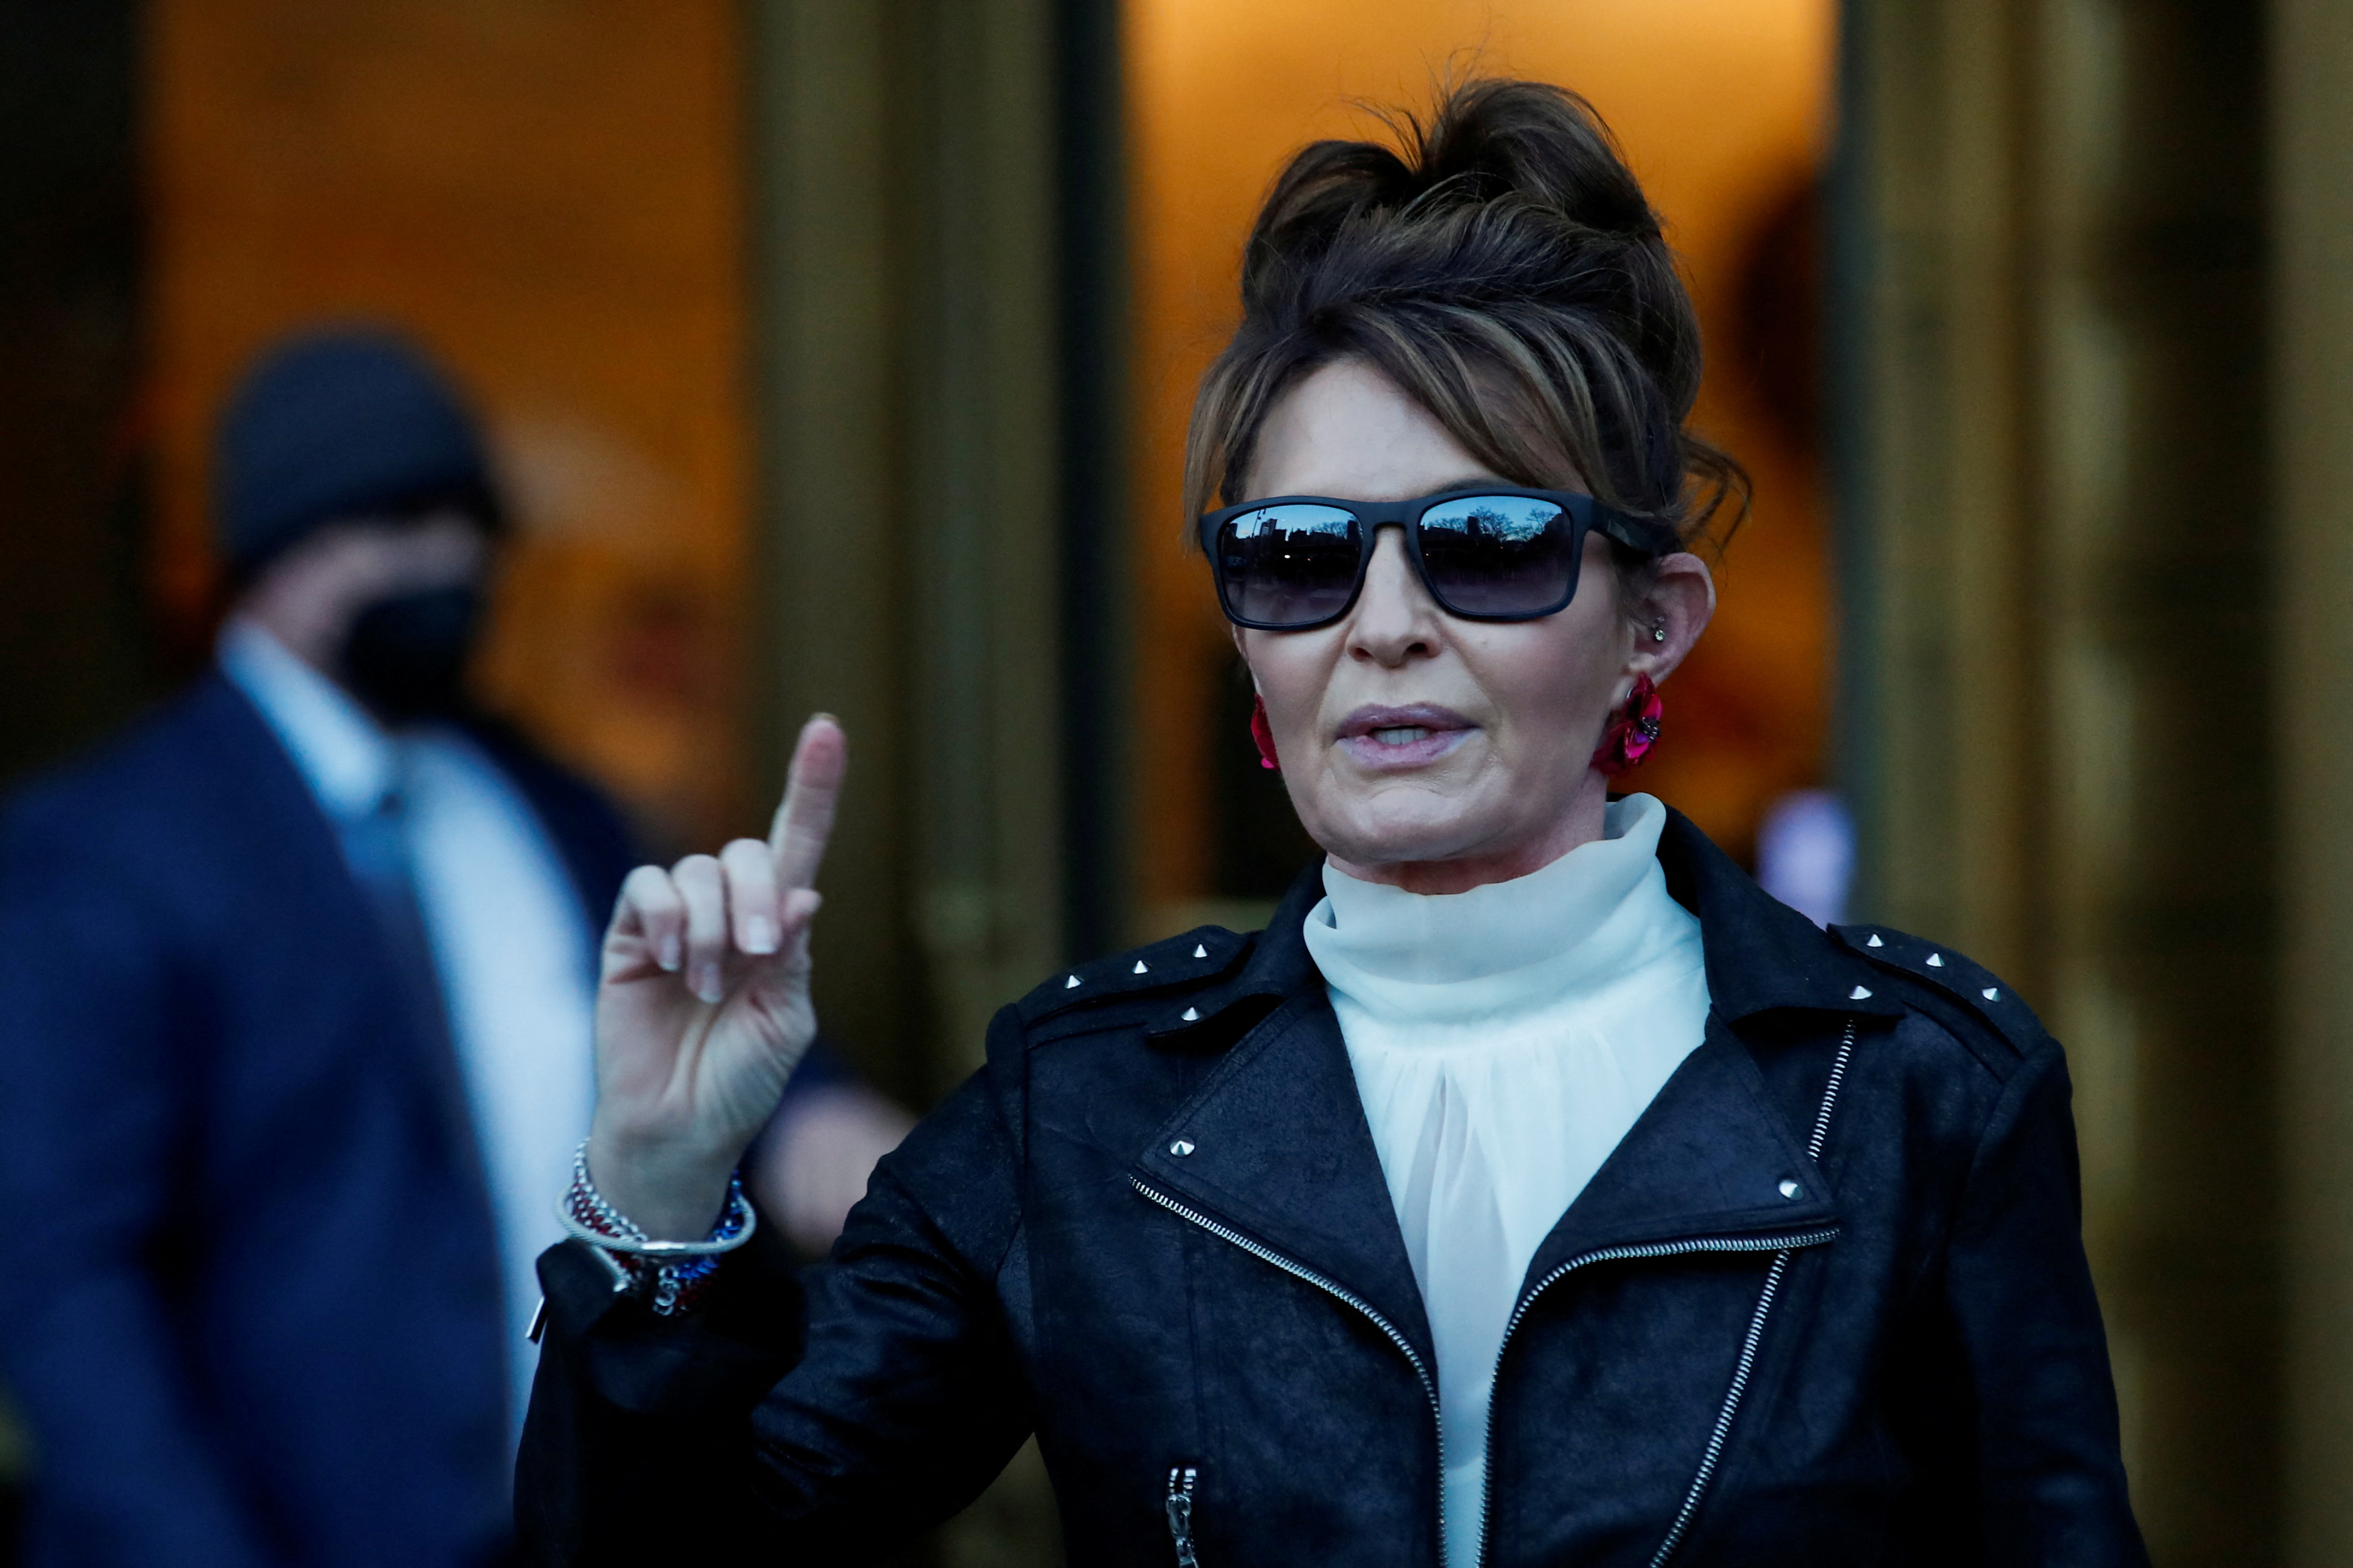 Sarah Palin, 2008 Republican vice presidential candidate and former Alaska governor, exits the United States Courthouse in New York